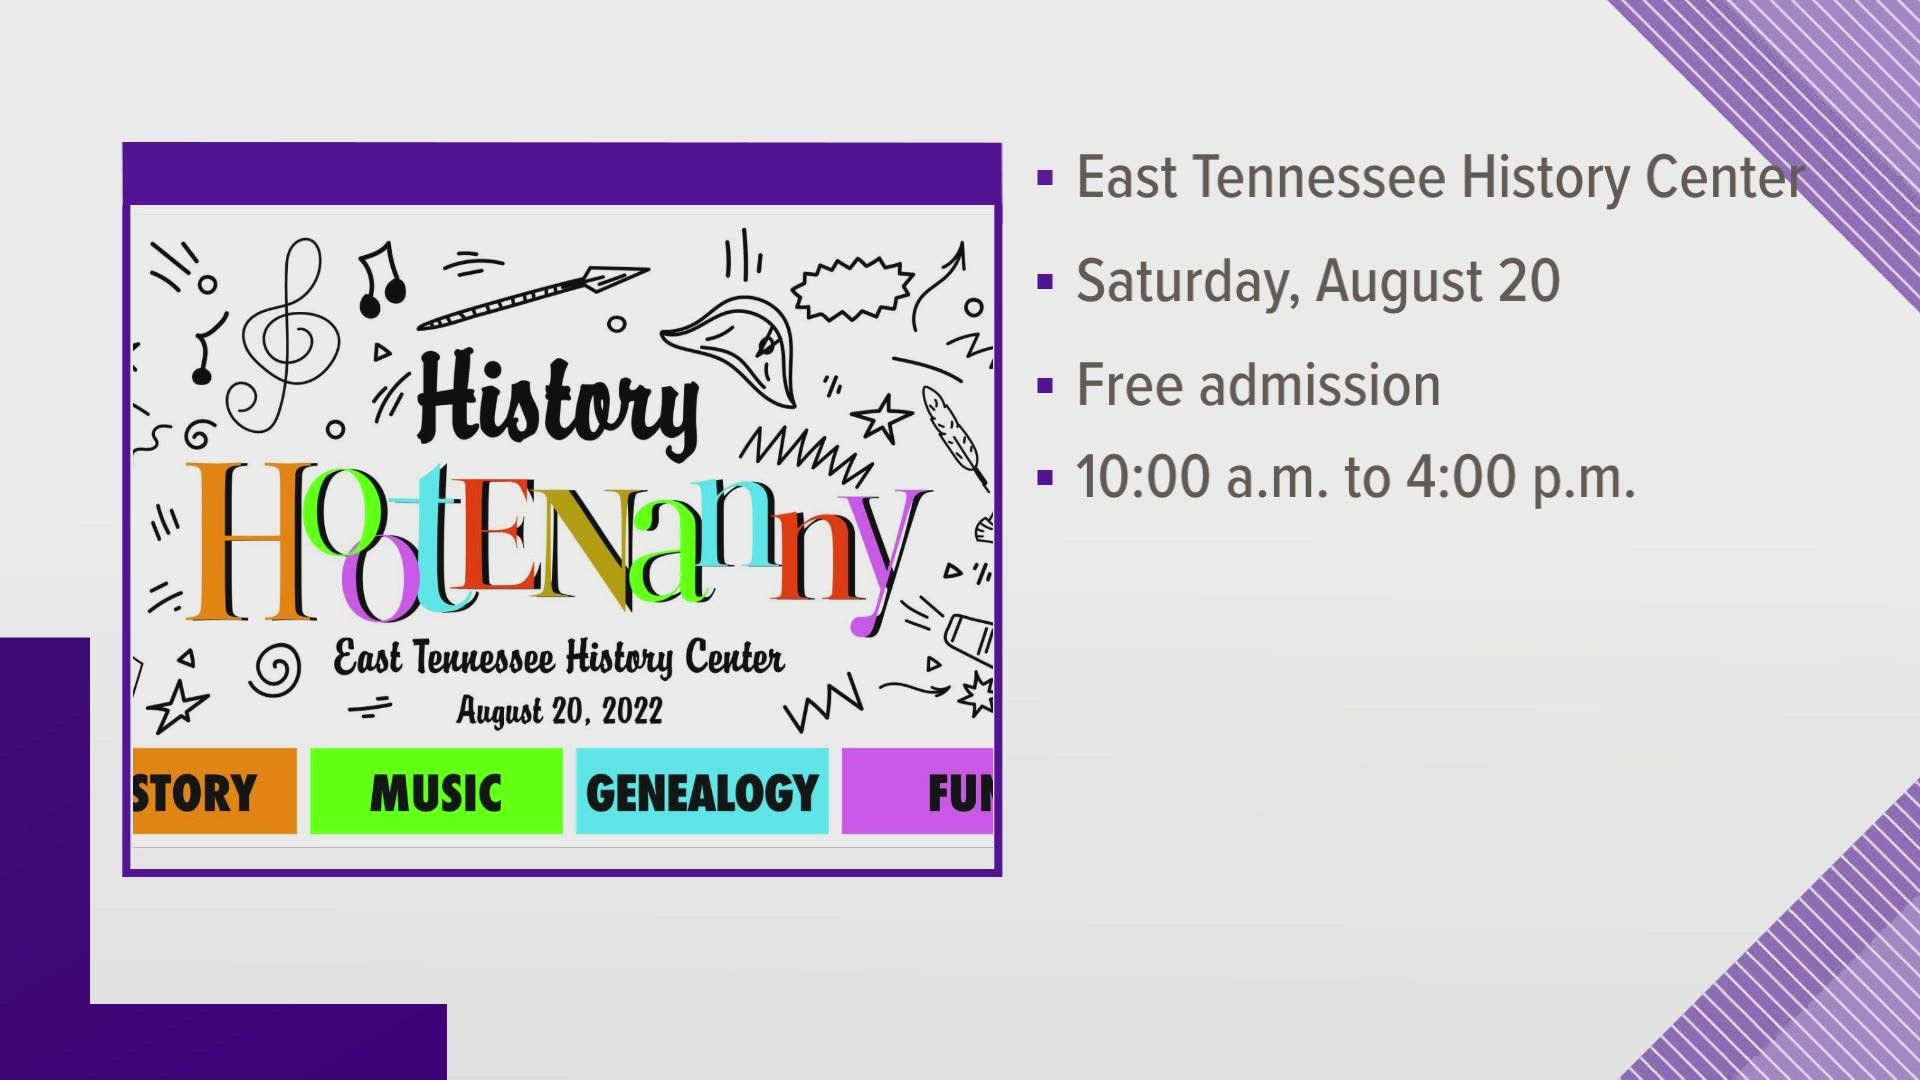 The East Tennessee History Center will host a free "hootenanny" event so people can take a step back in the past on Saturday from 10 a.m. to 4 p.m.